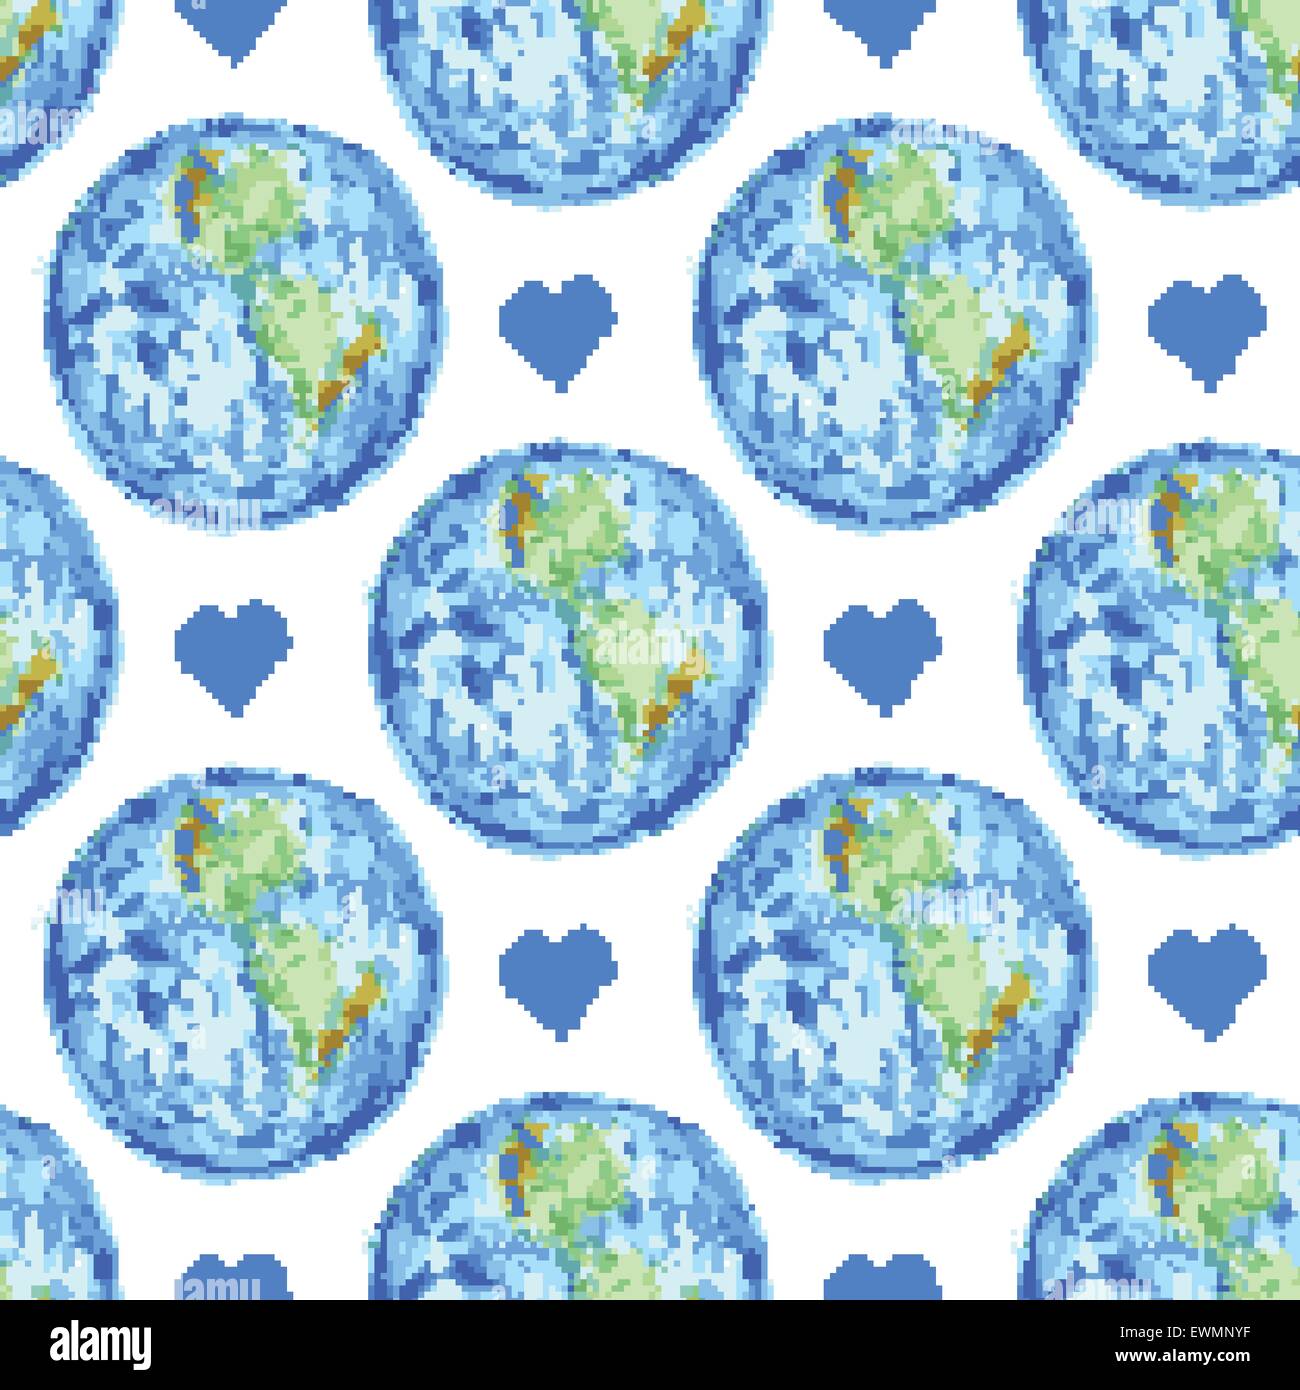 Sketch Earth and heart in vintage style, vector seamless pattern Stock Vector